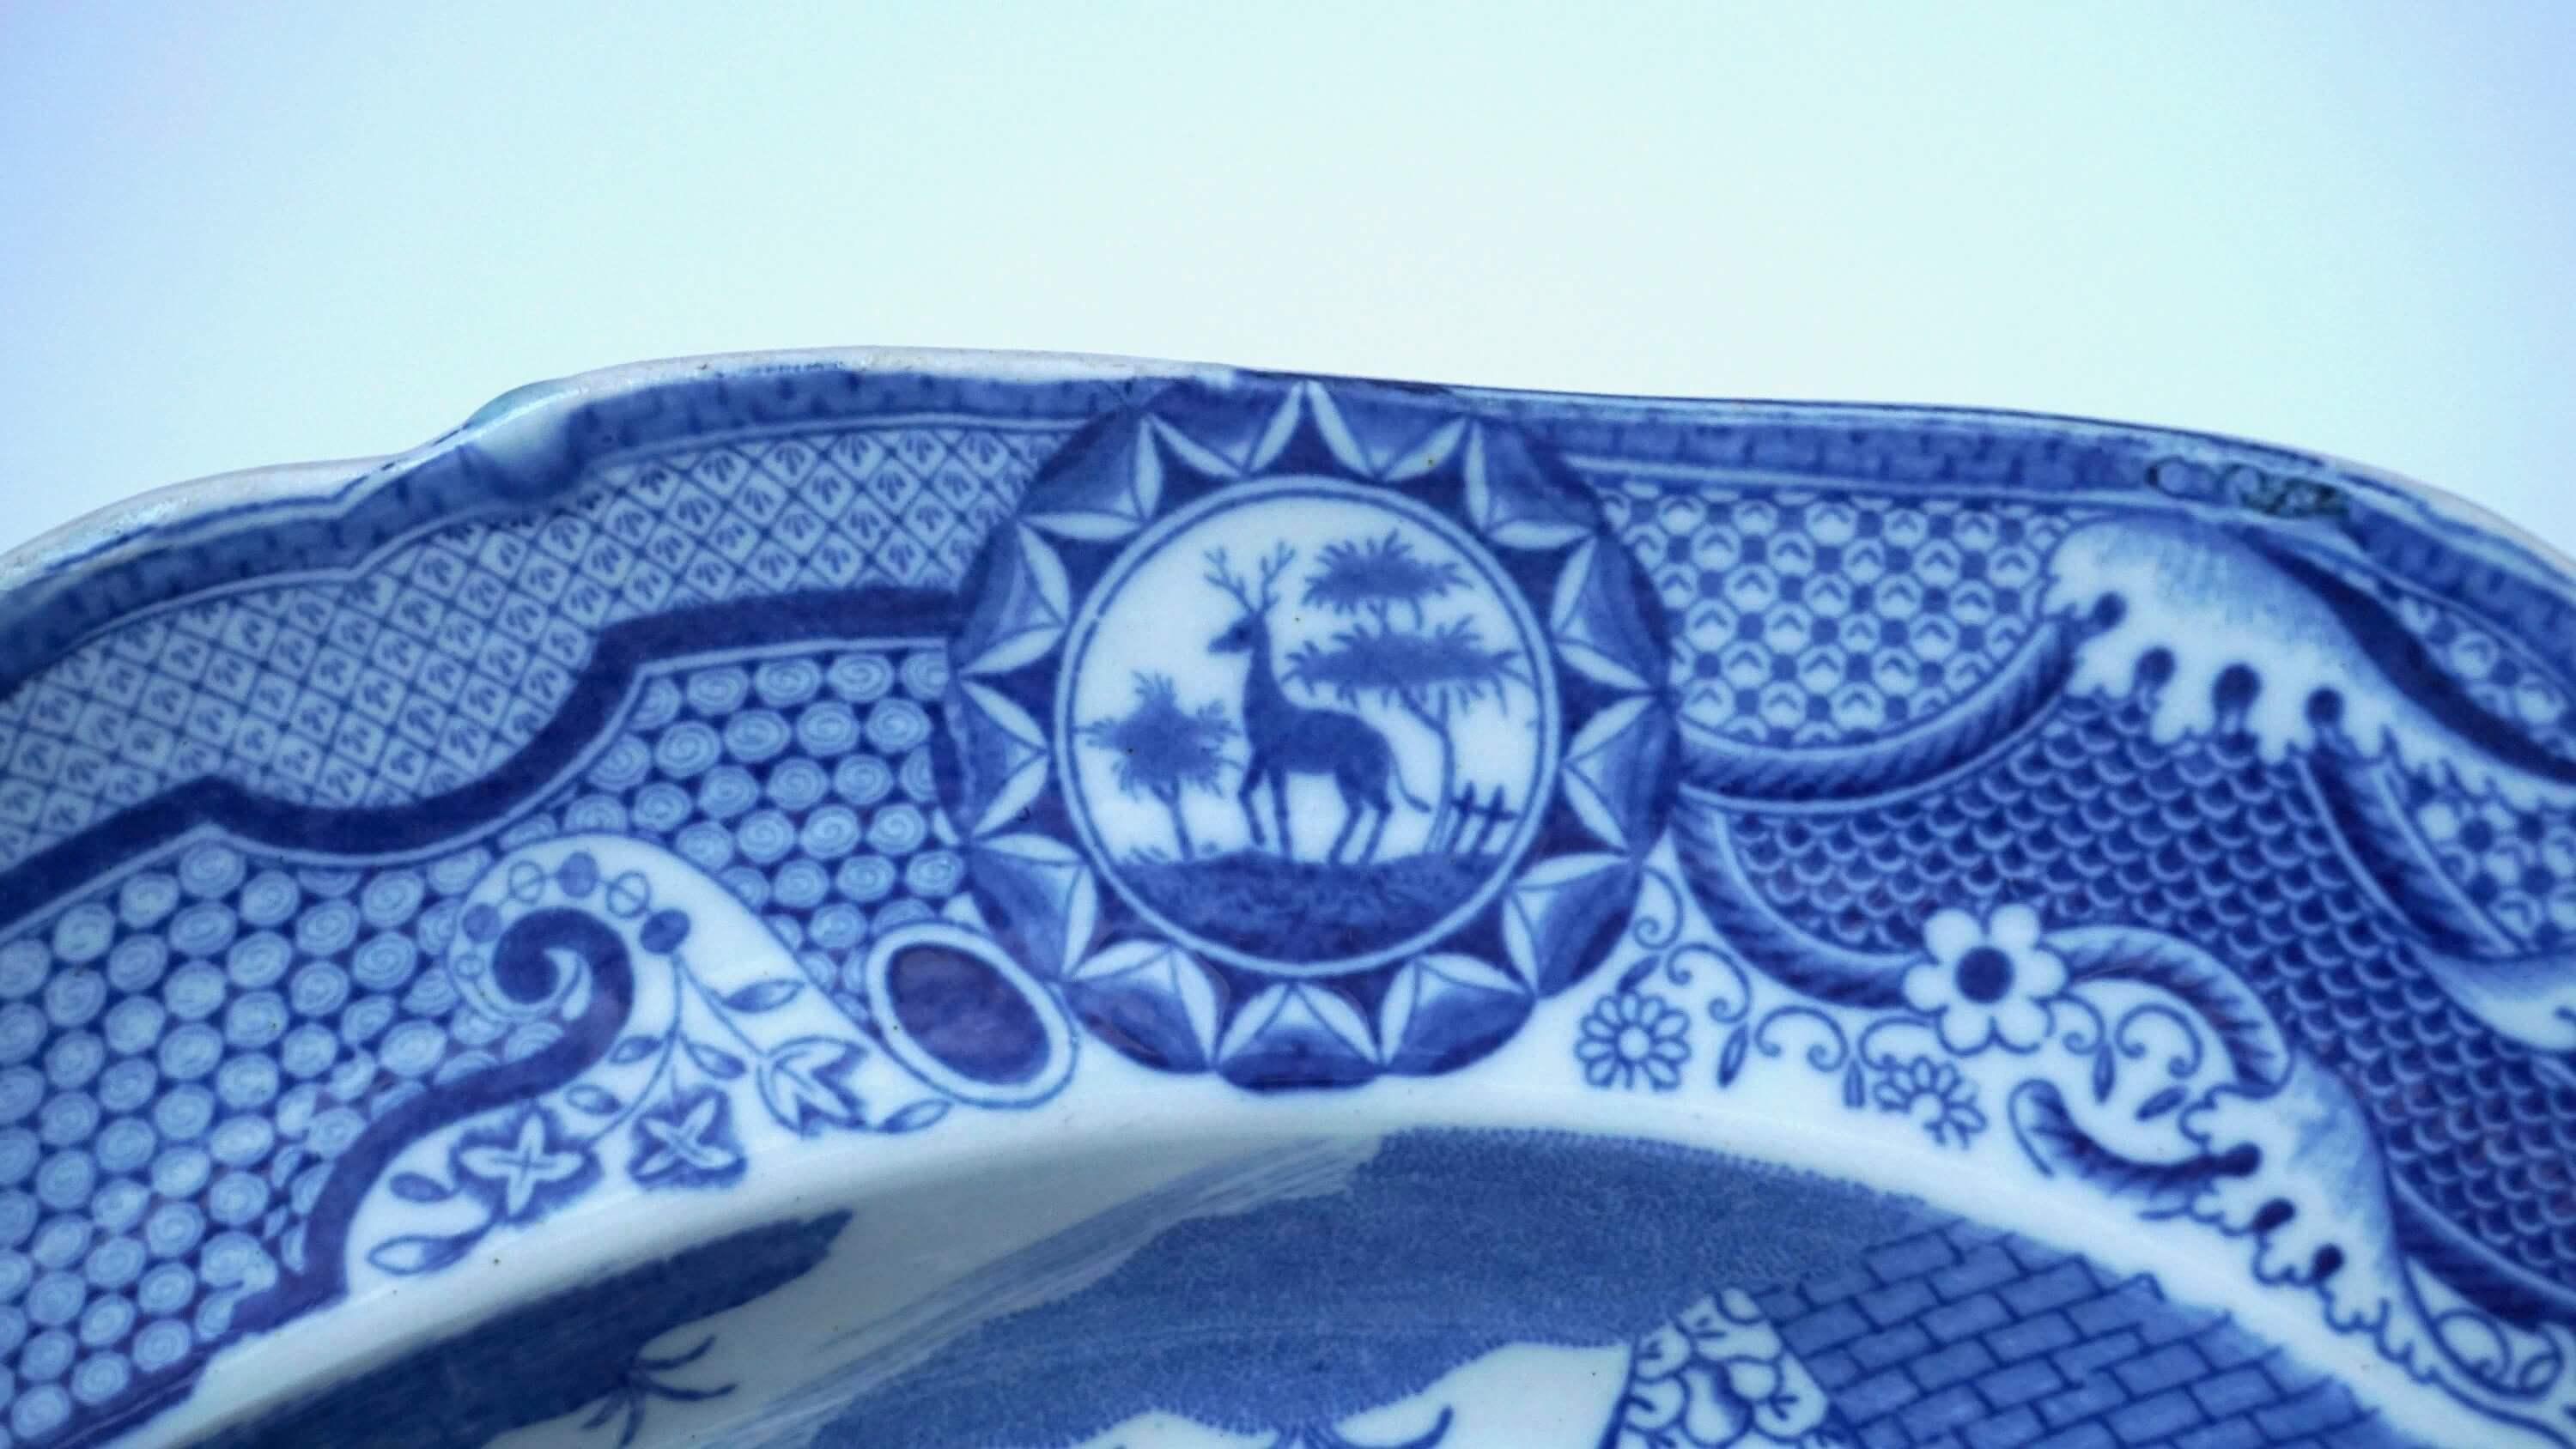 English Spode 'Gothic Castles' Large Blue and White Staffordshire Platter, circa 1815 For Sale